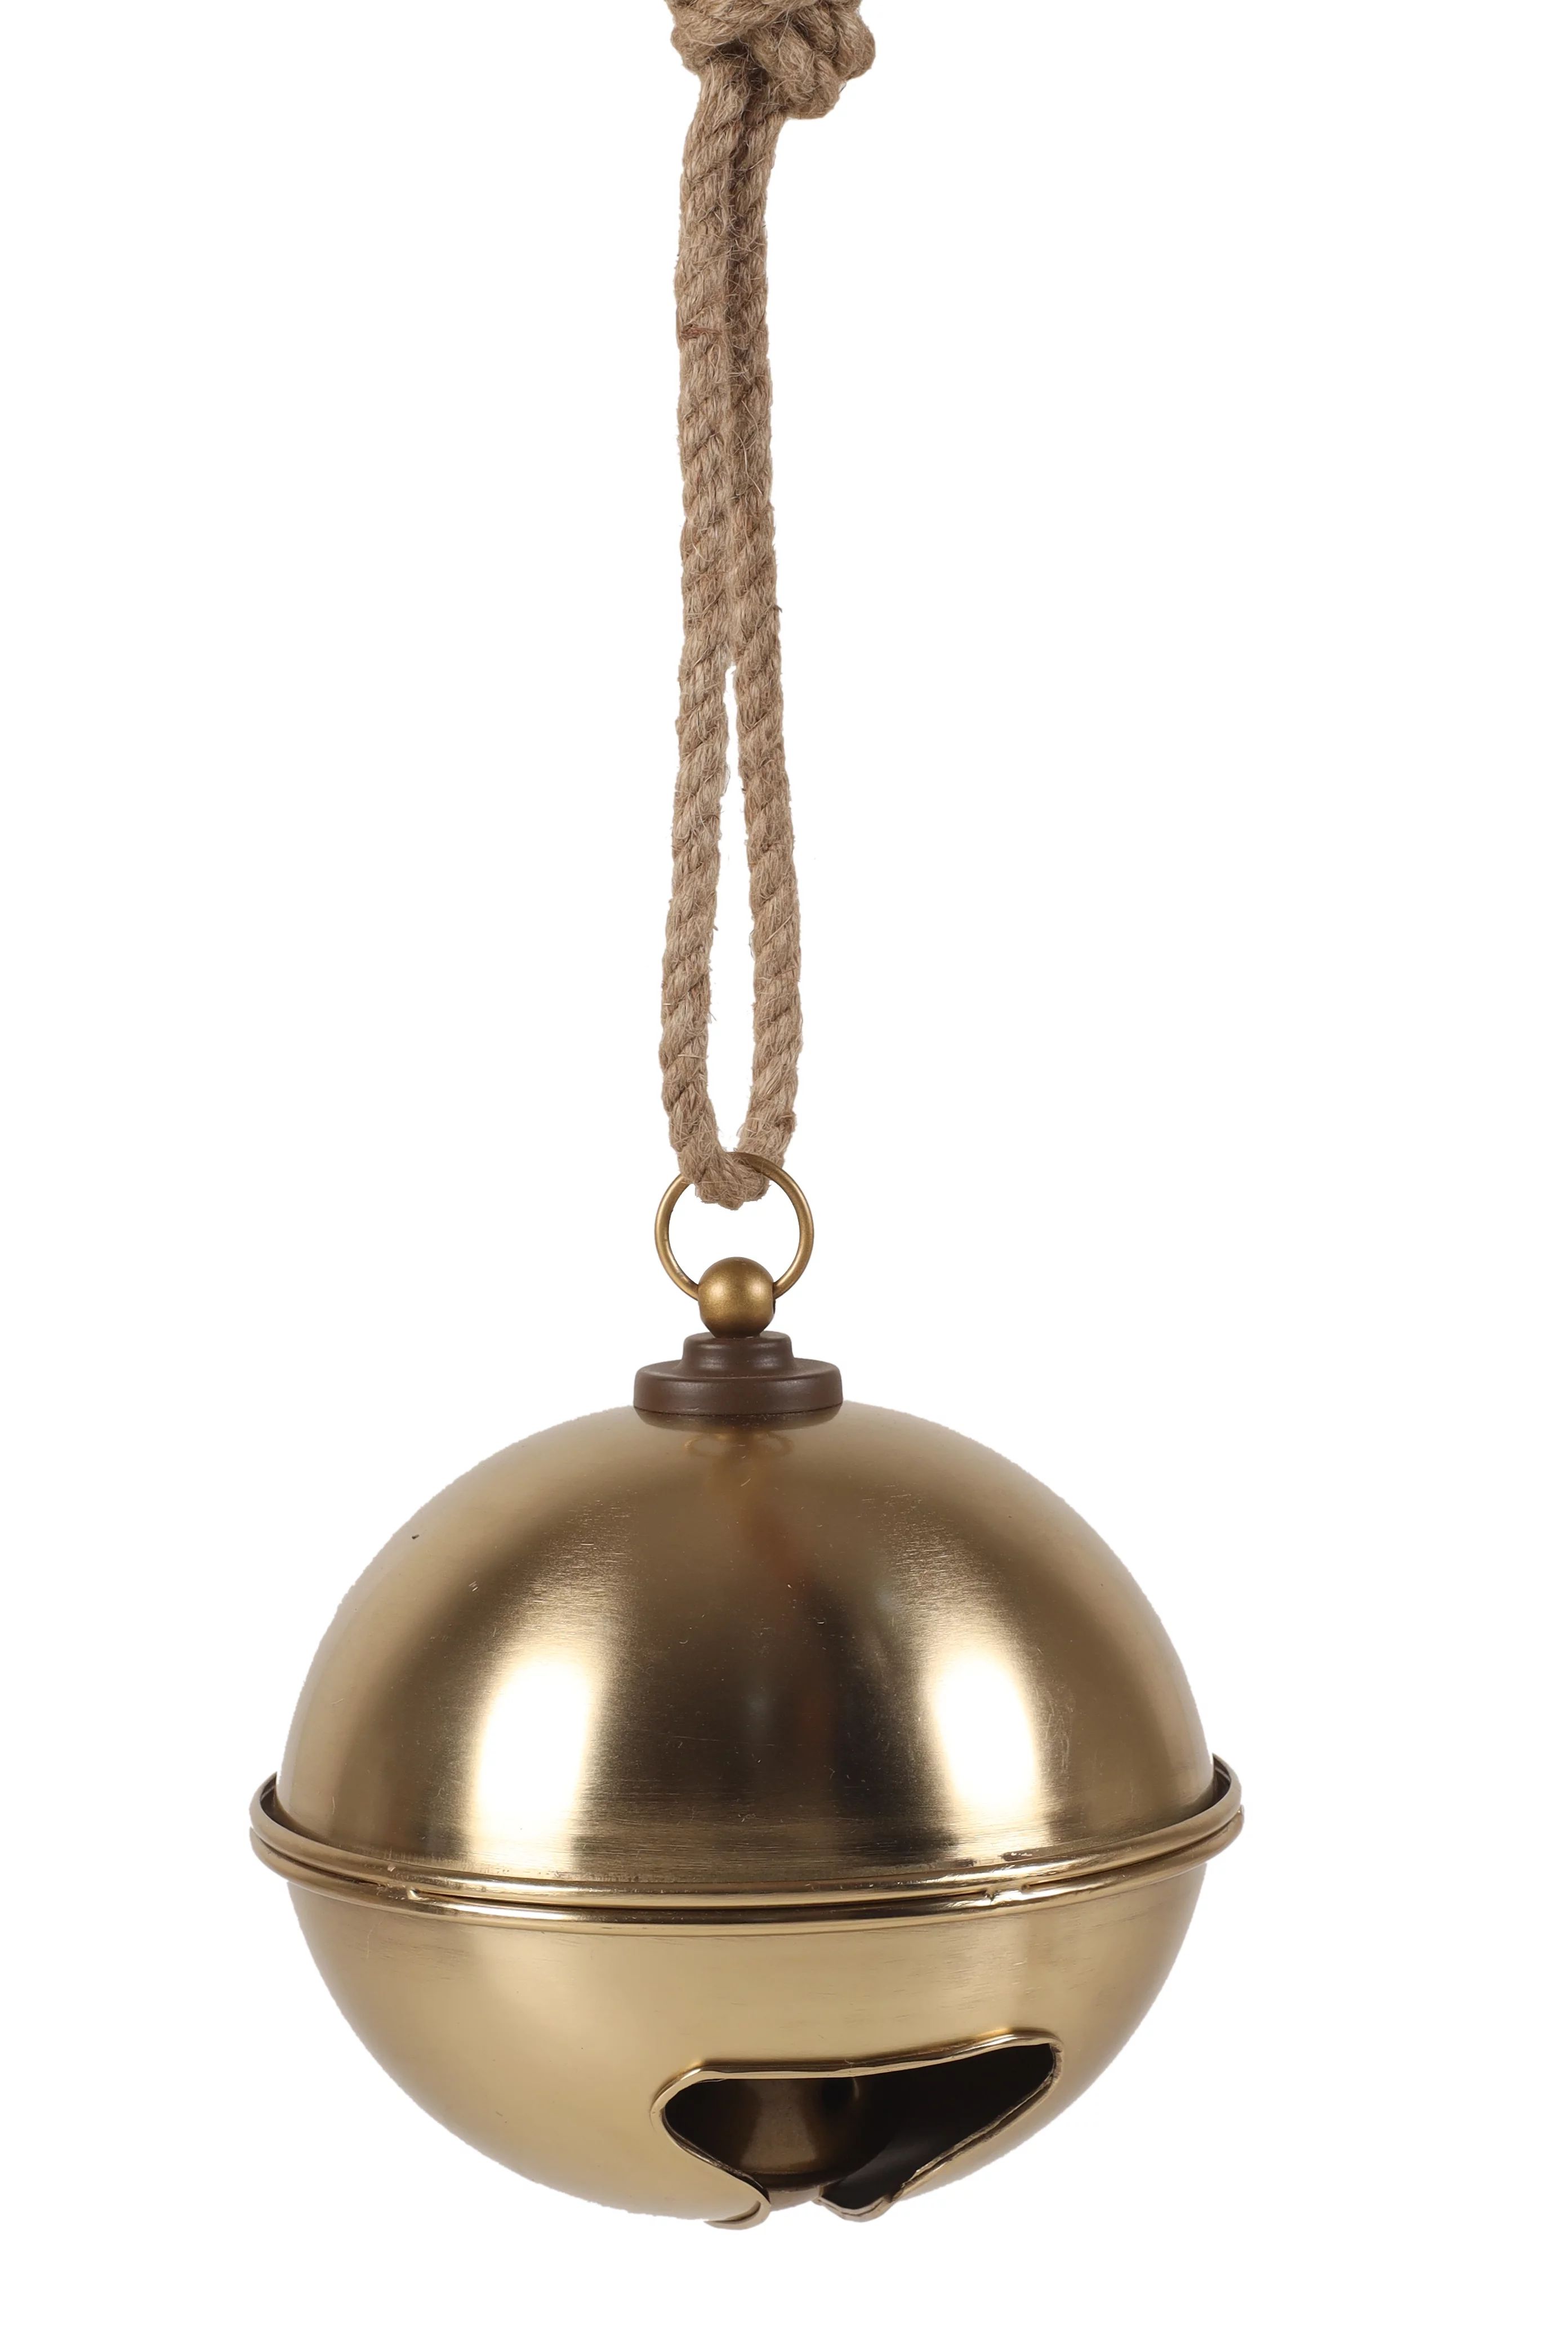 Gold Metal Hanging Bell with Rope Christmas Decoration, 8.25", by Holiday Time | Walmart (US)